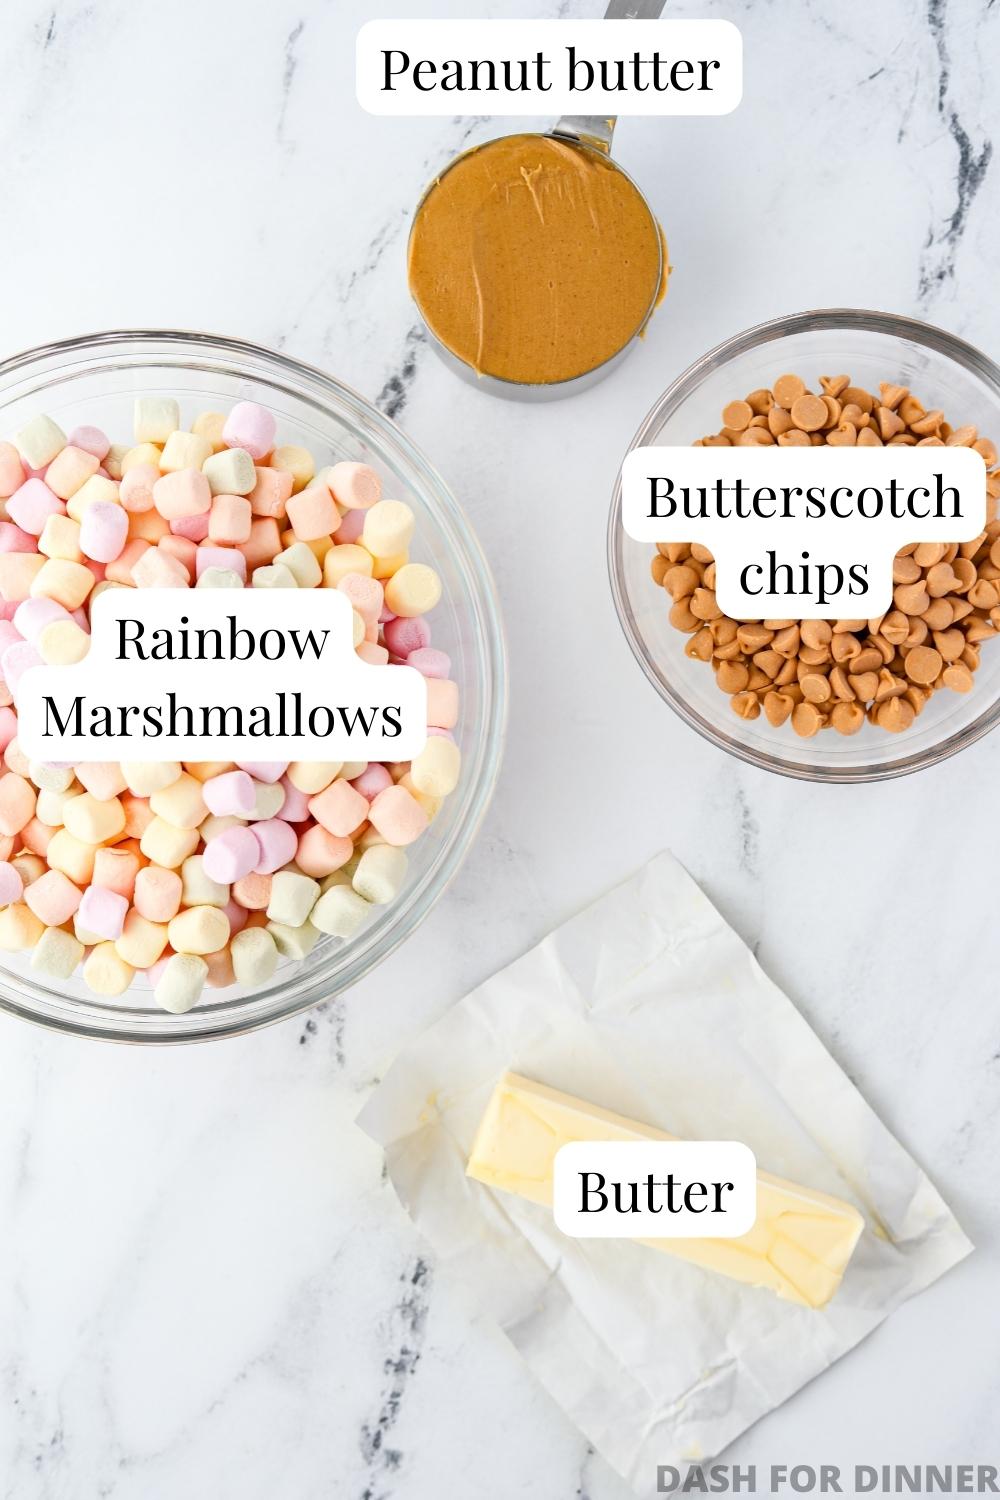 The ingredients needed to make butterscotch marshmallow bars: rainbow marshmallows, butter, peanut butter, and butterscotch chips.